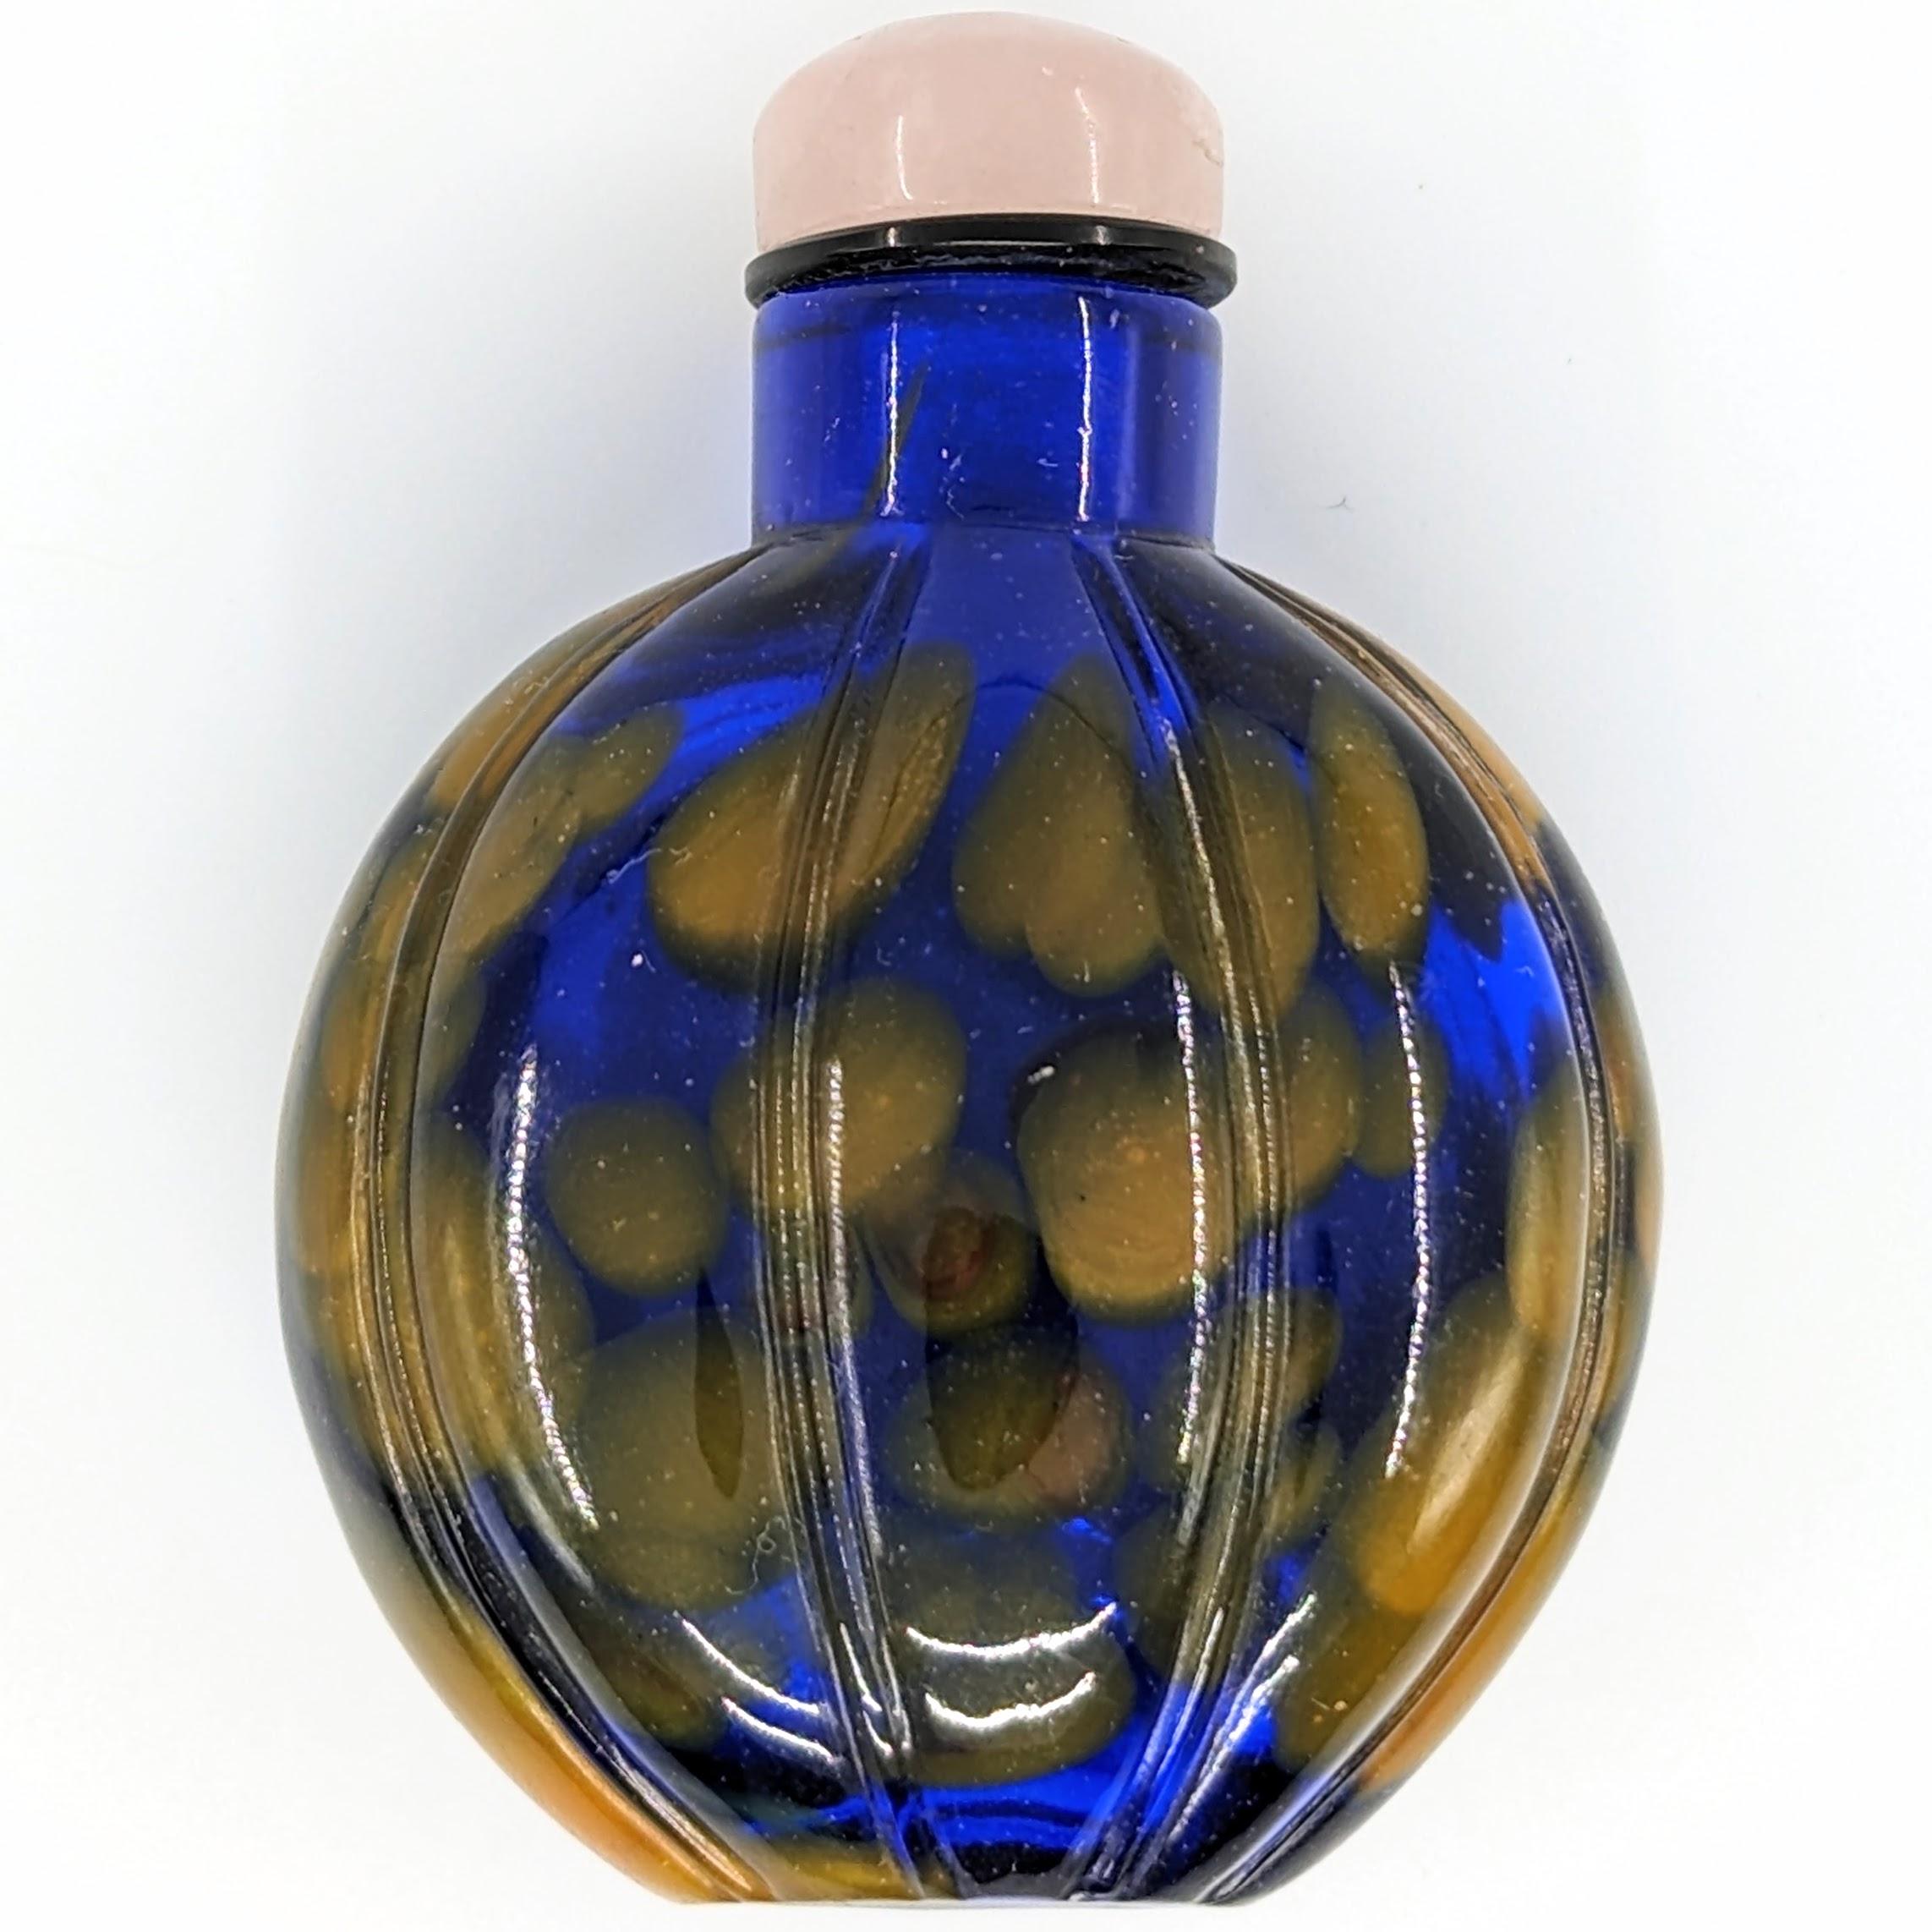 Antique Chinese mottled Peking liuli glass snuff bottle, with well distributed spots of yellow on cobolt blue, with a rose quartz stopper

19c Qing Dynasty